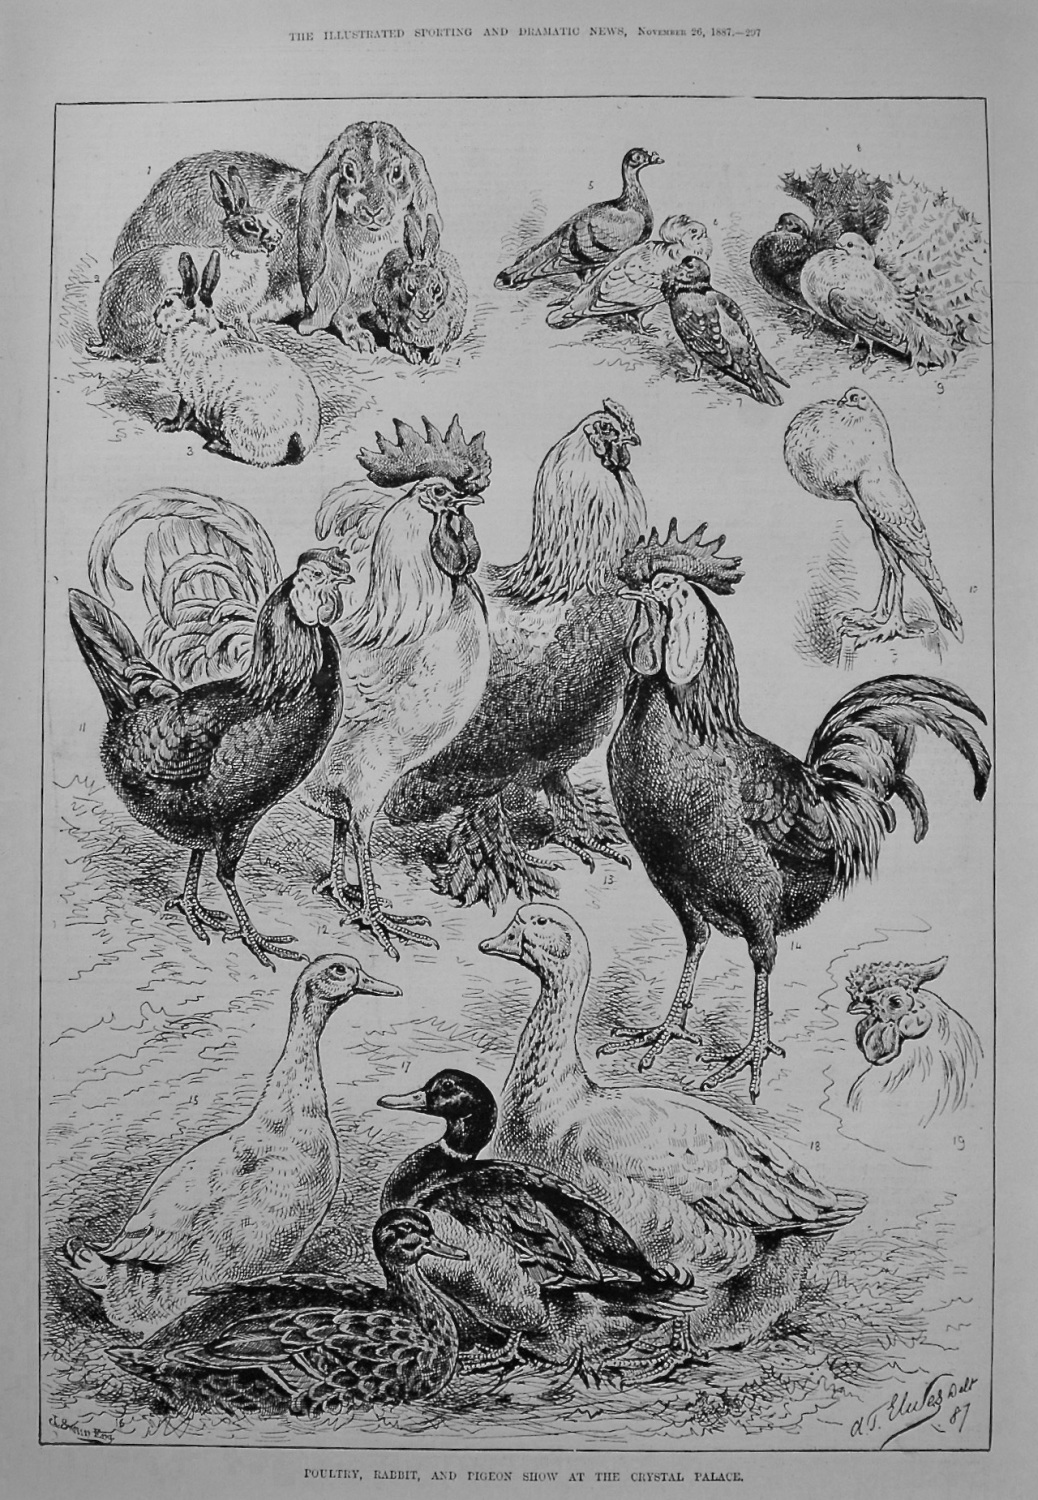 Poultry, Rabbit, and Pigeon Show at the Crystal Palace. 1887